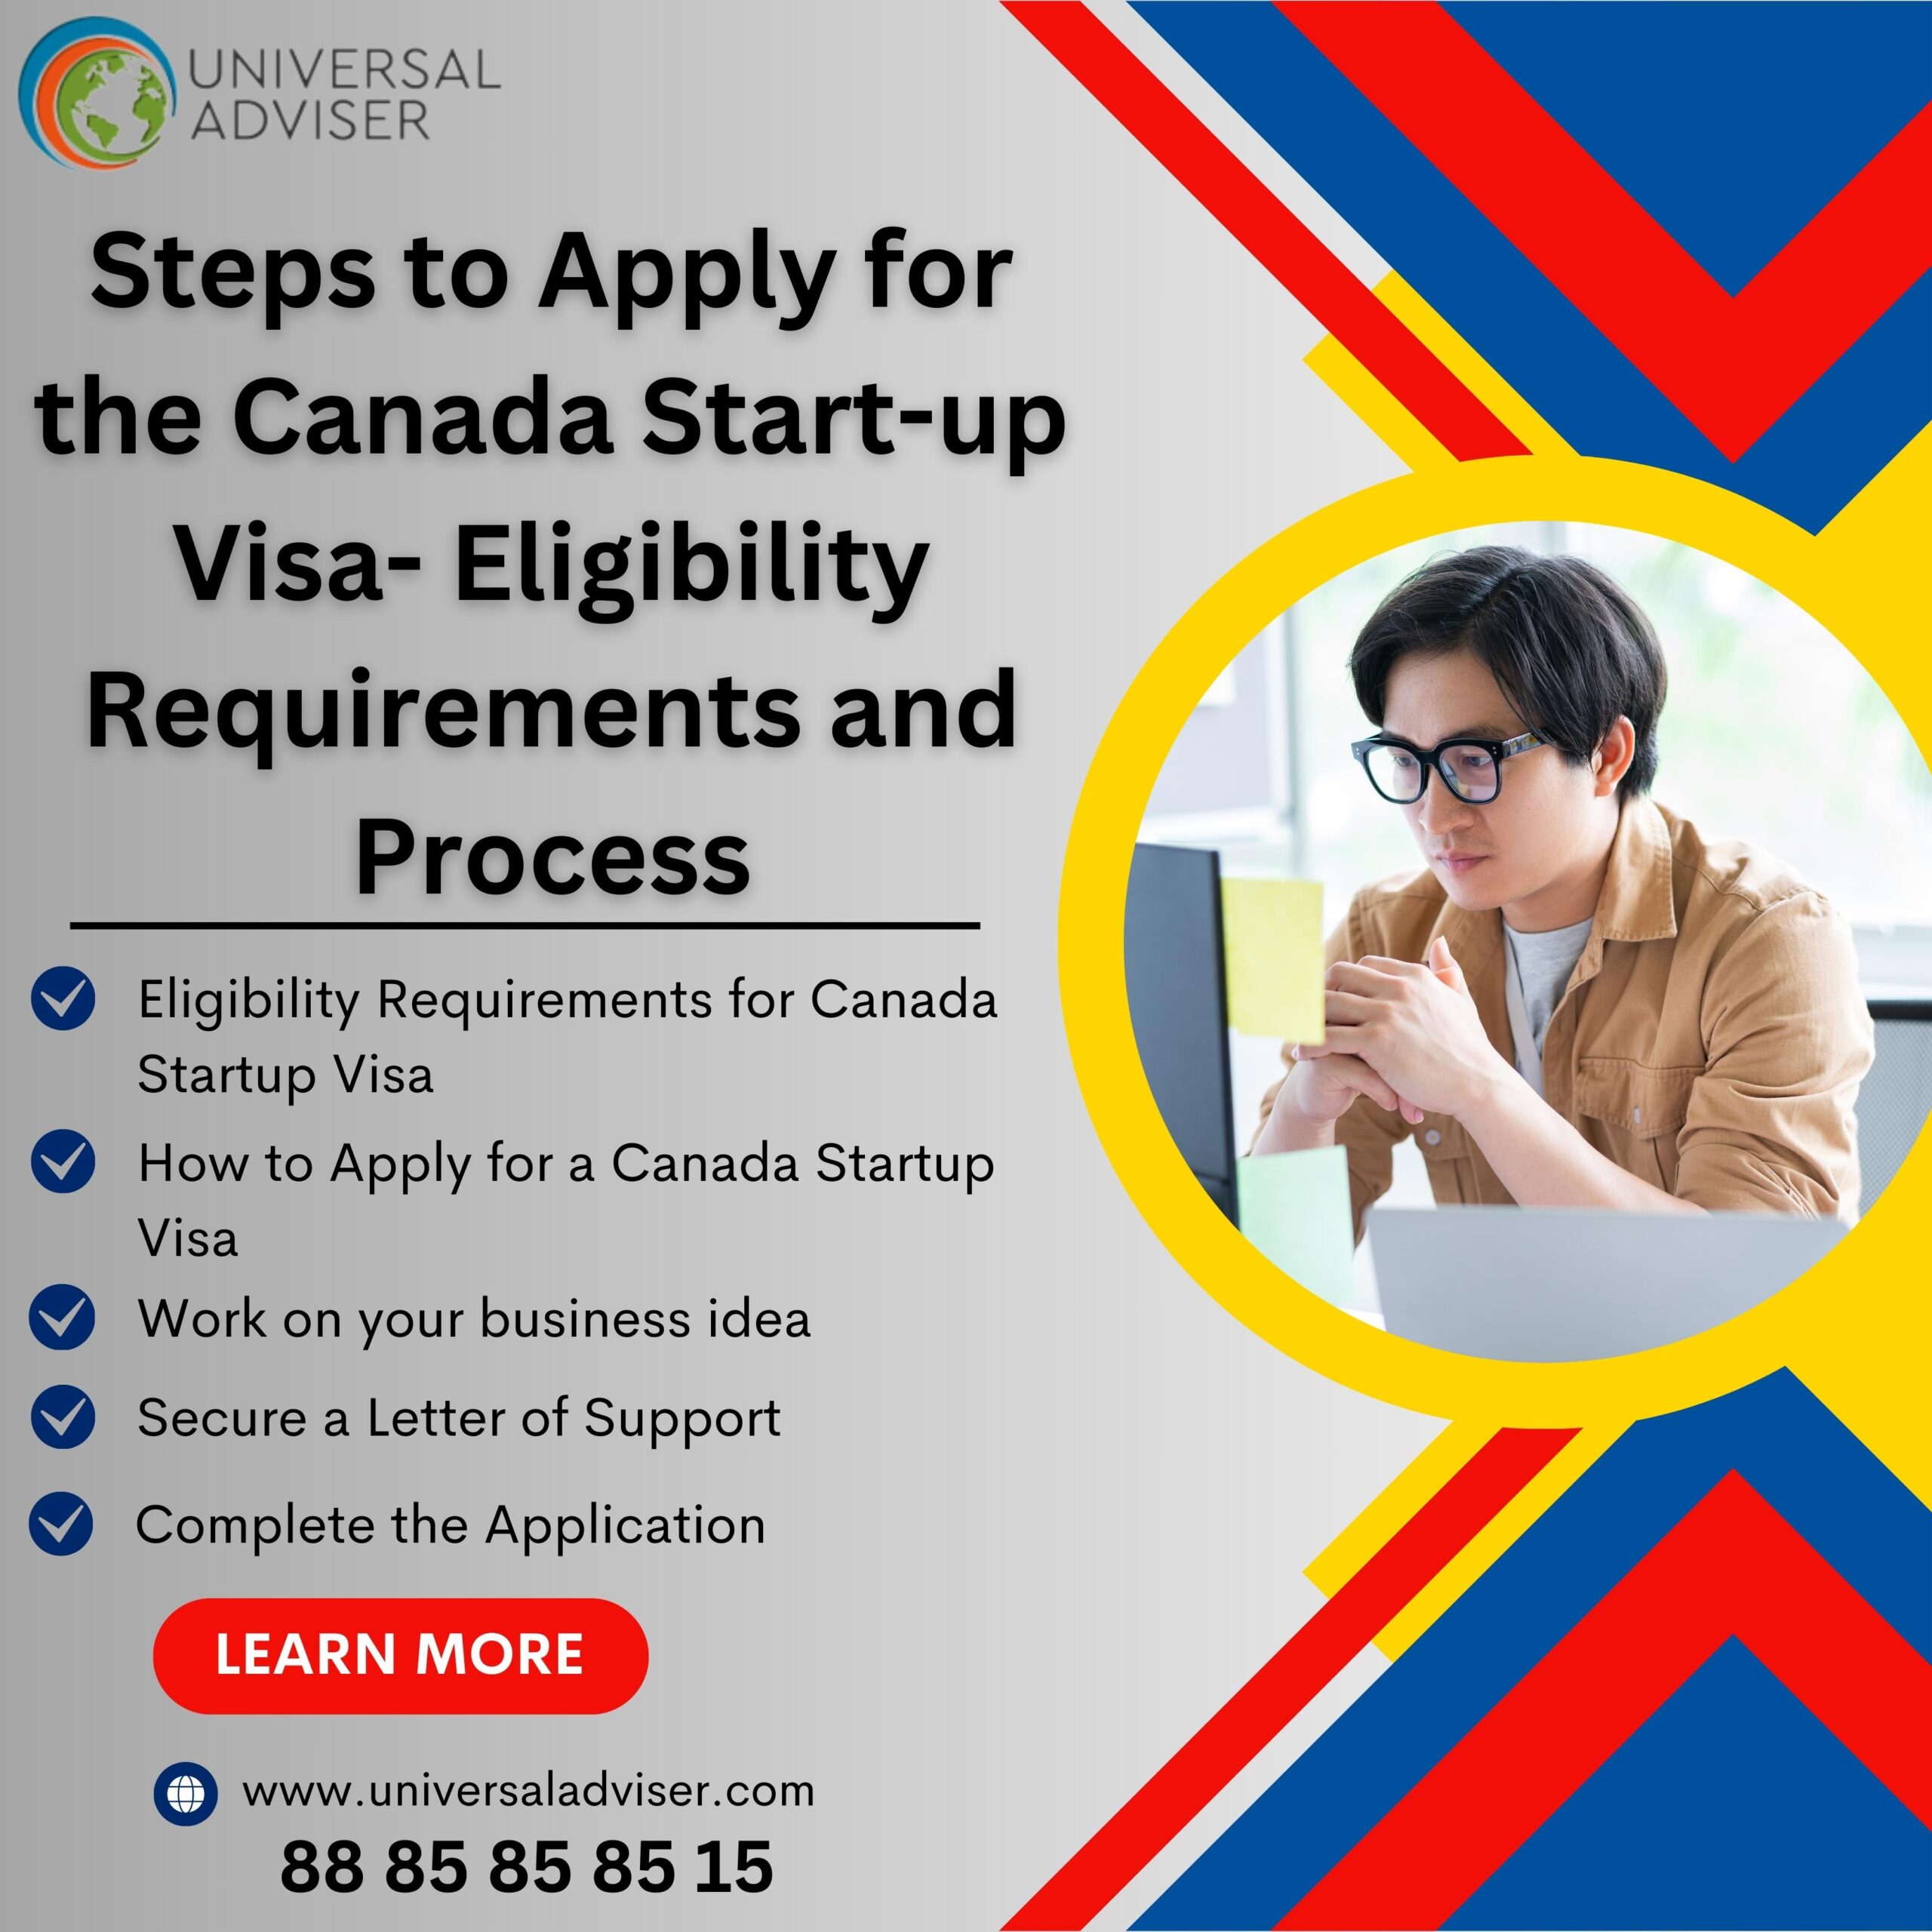 Steps to Apply for the Canada Start-up Visa- Eligibility Requirements and Process